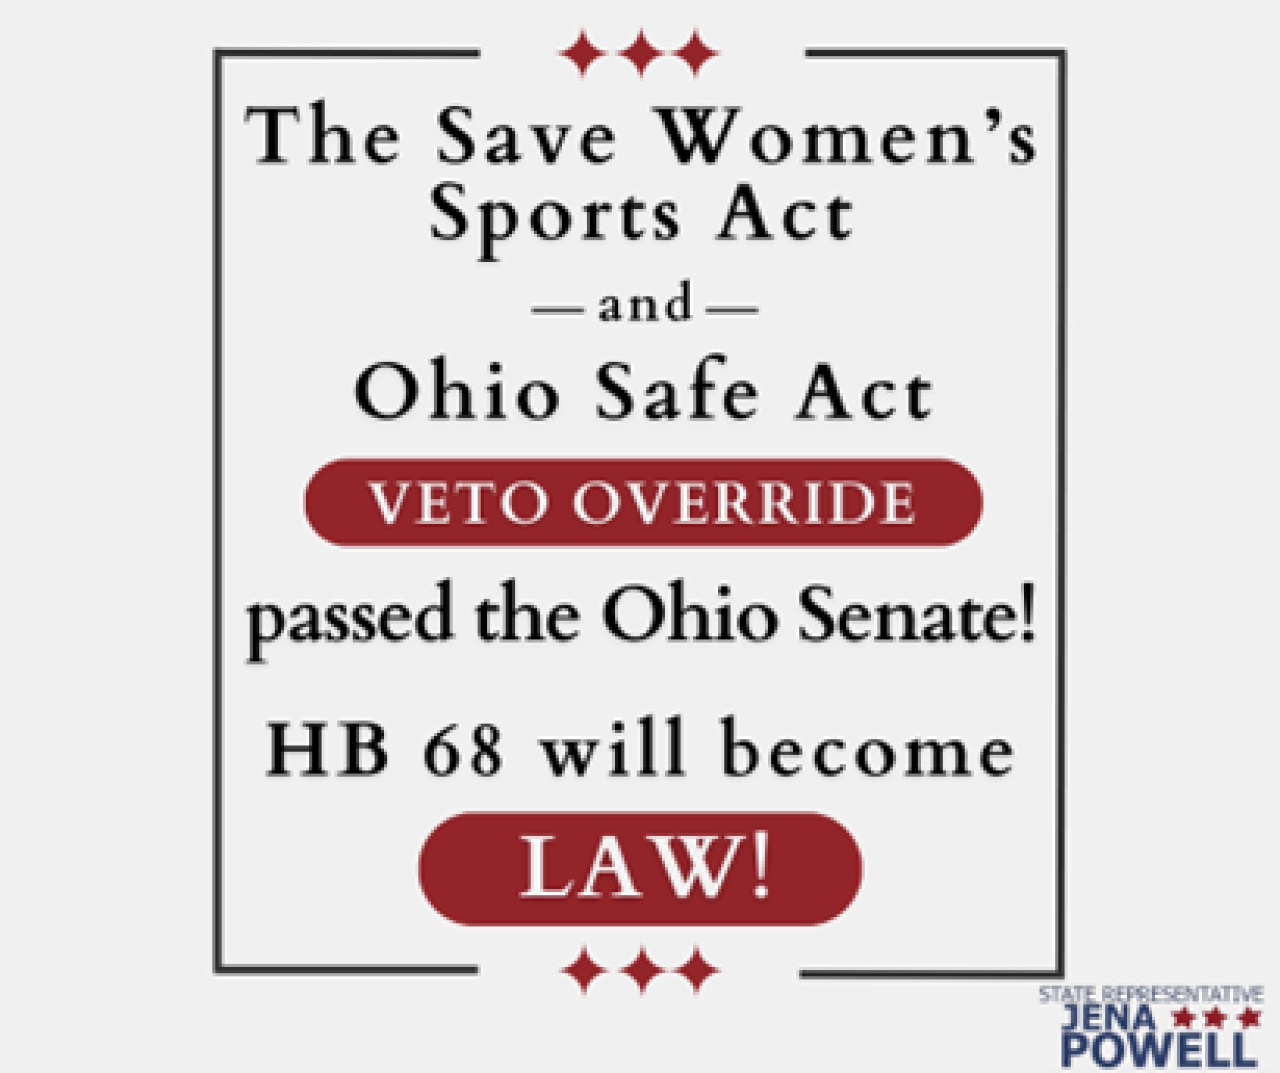 Powell's Save Women's Sports Act Becomes Law